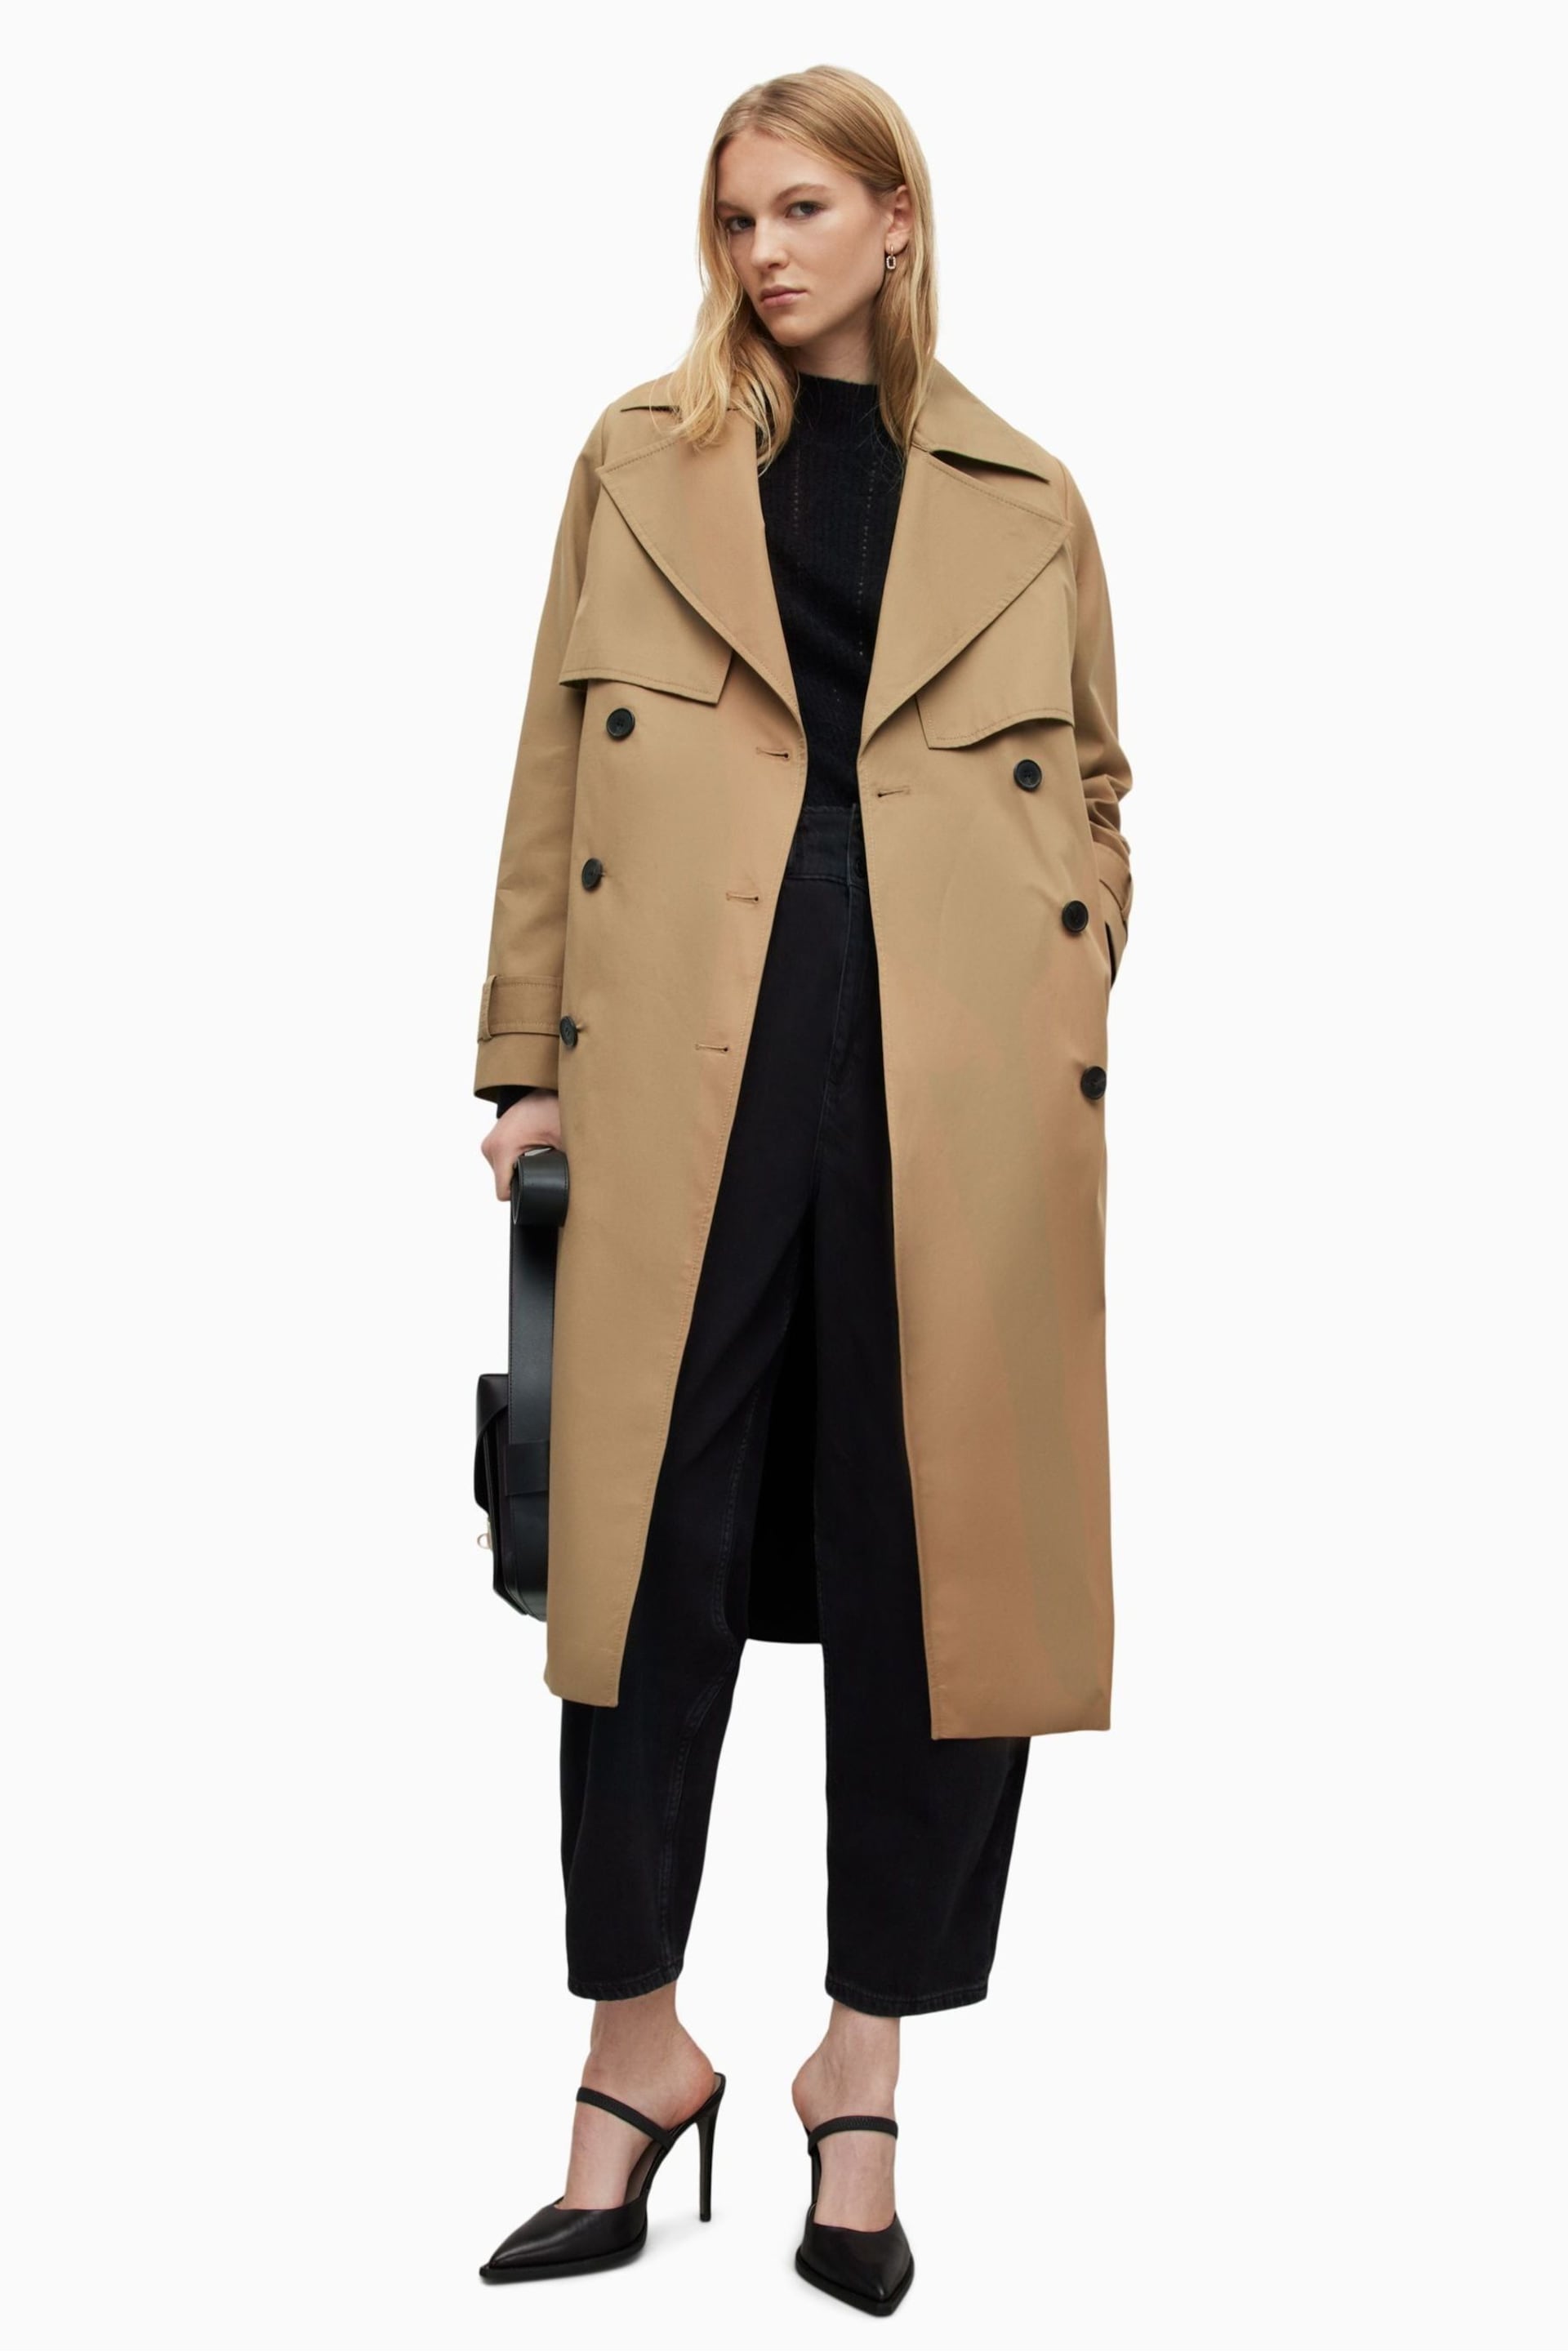 AllSaints Black Mixie Trench Coat - Image 4 of 8